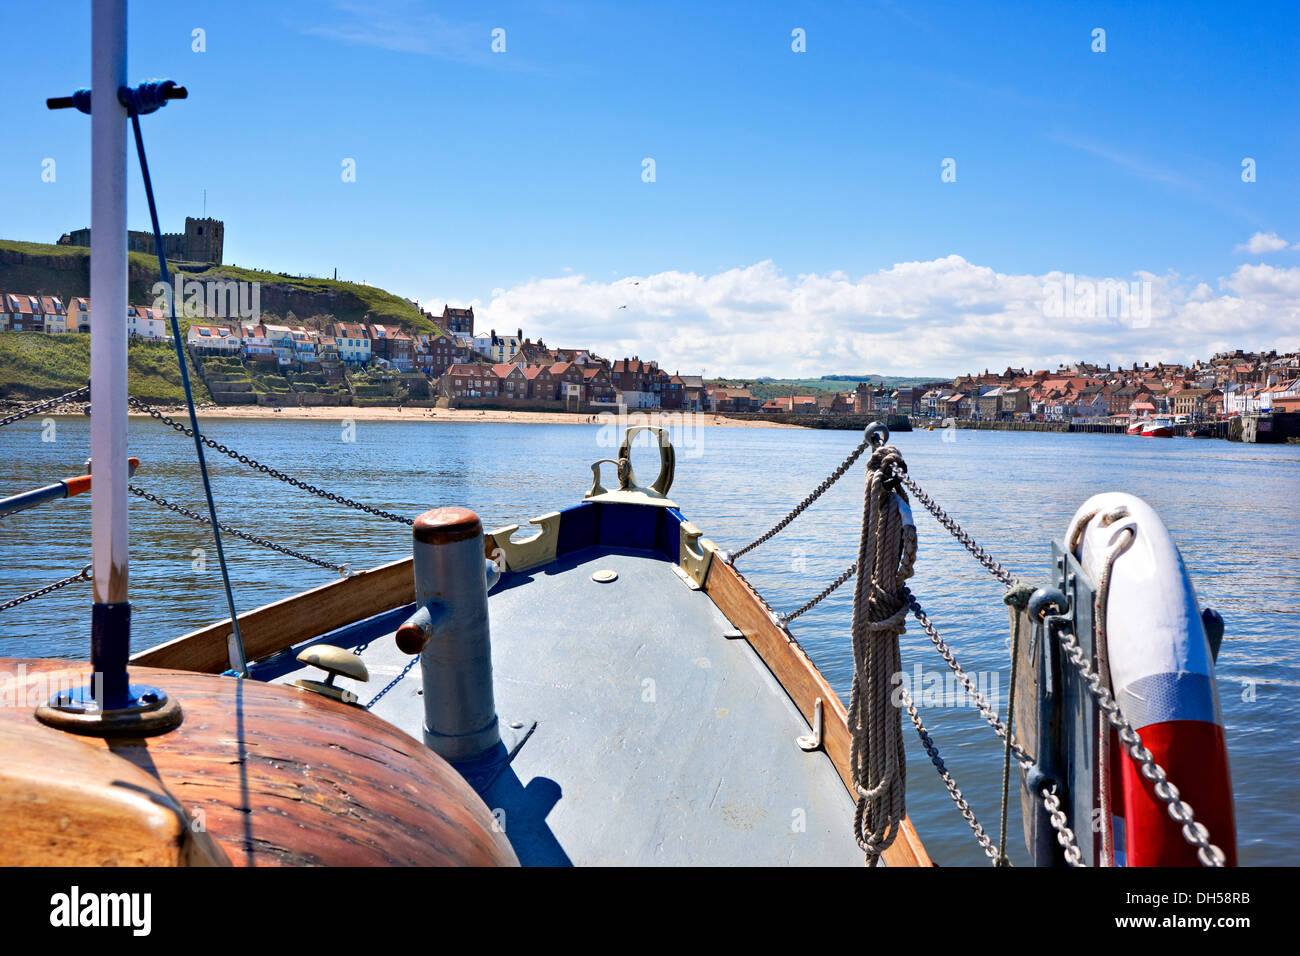 Coming into Whitby Harbour - North Yorkshire coastal town UK Stock Photo